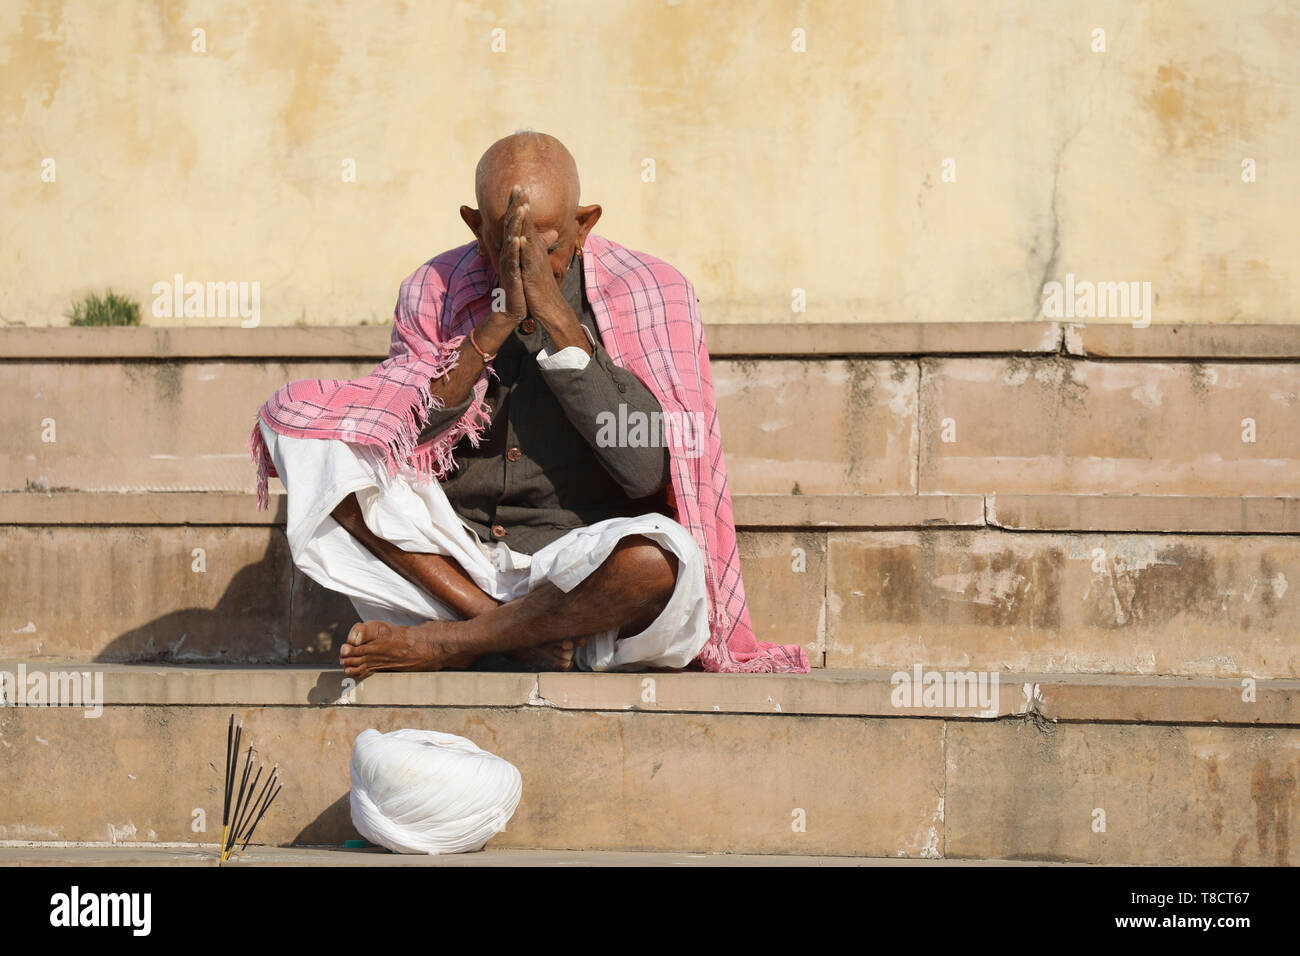 Old indian Man sitting on steps and praying Stock Photo